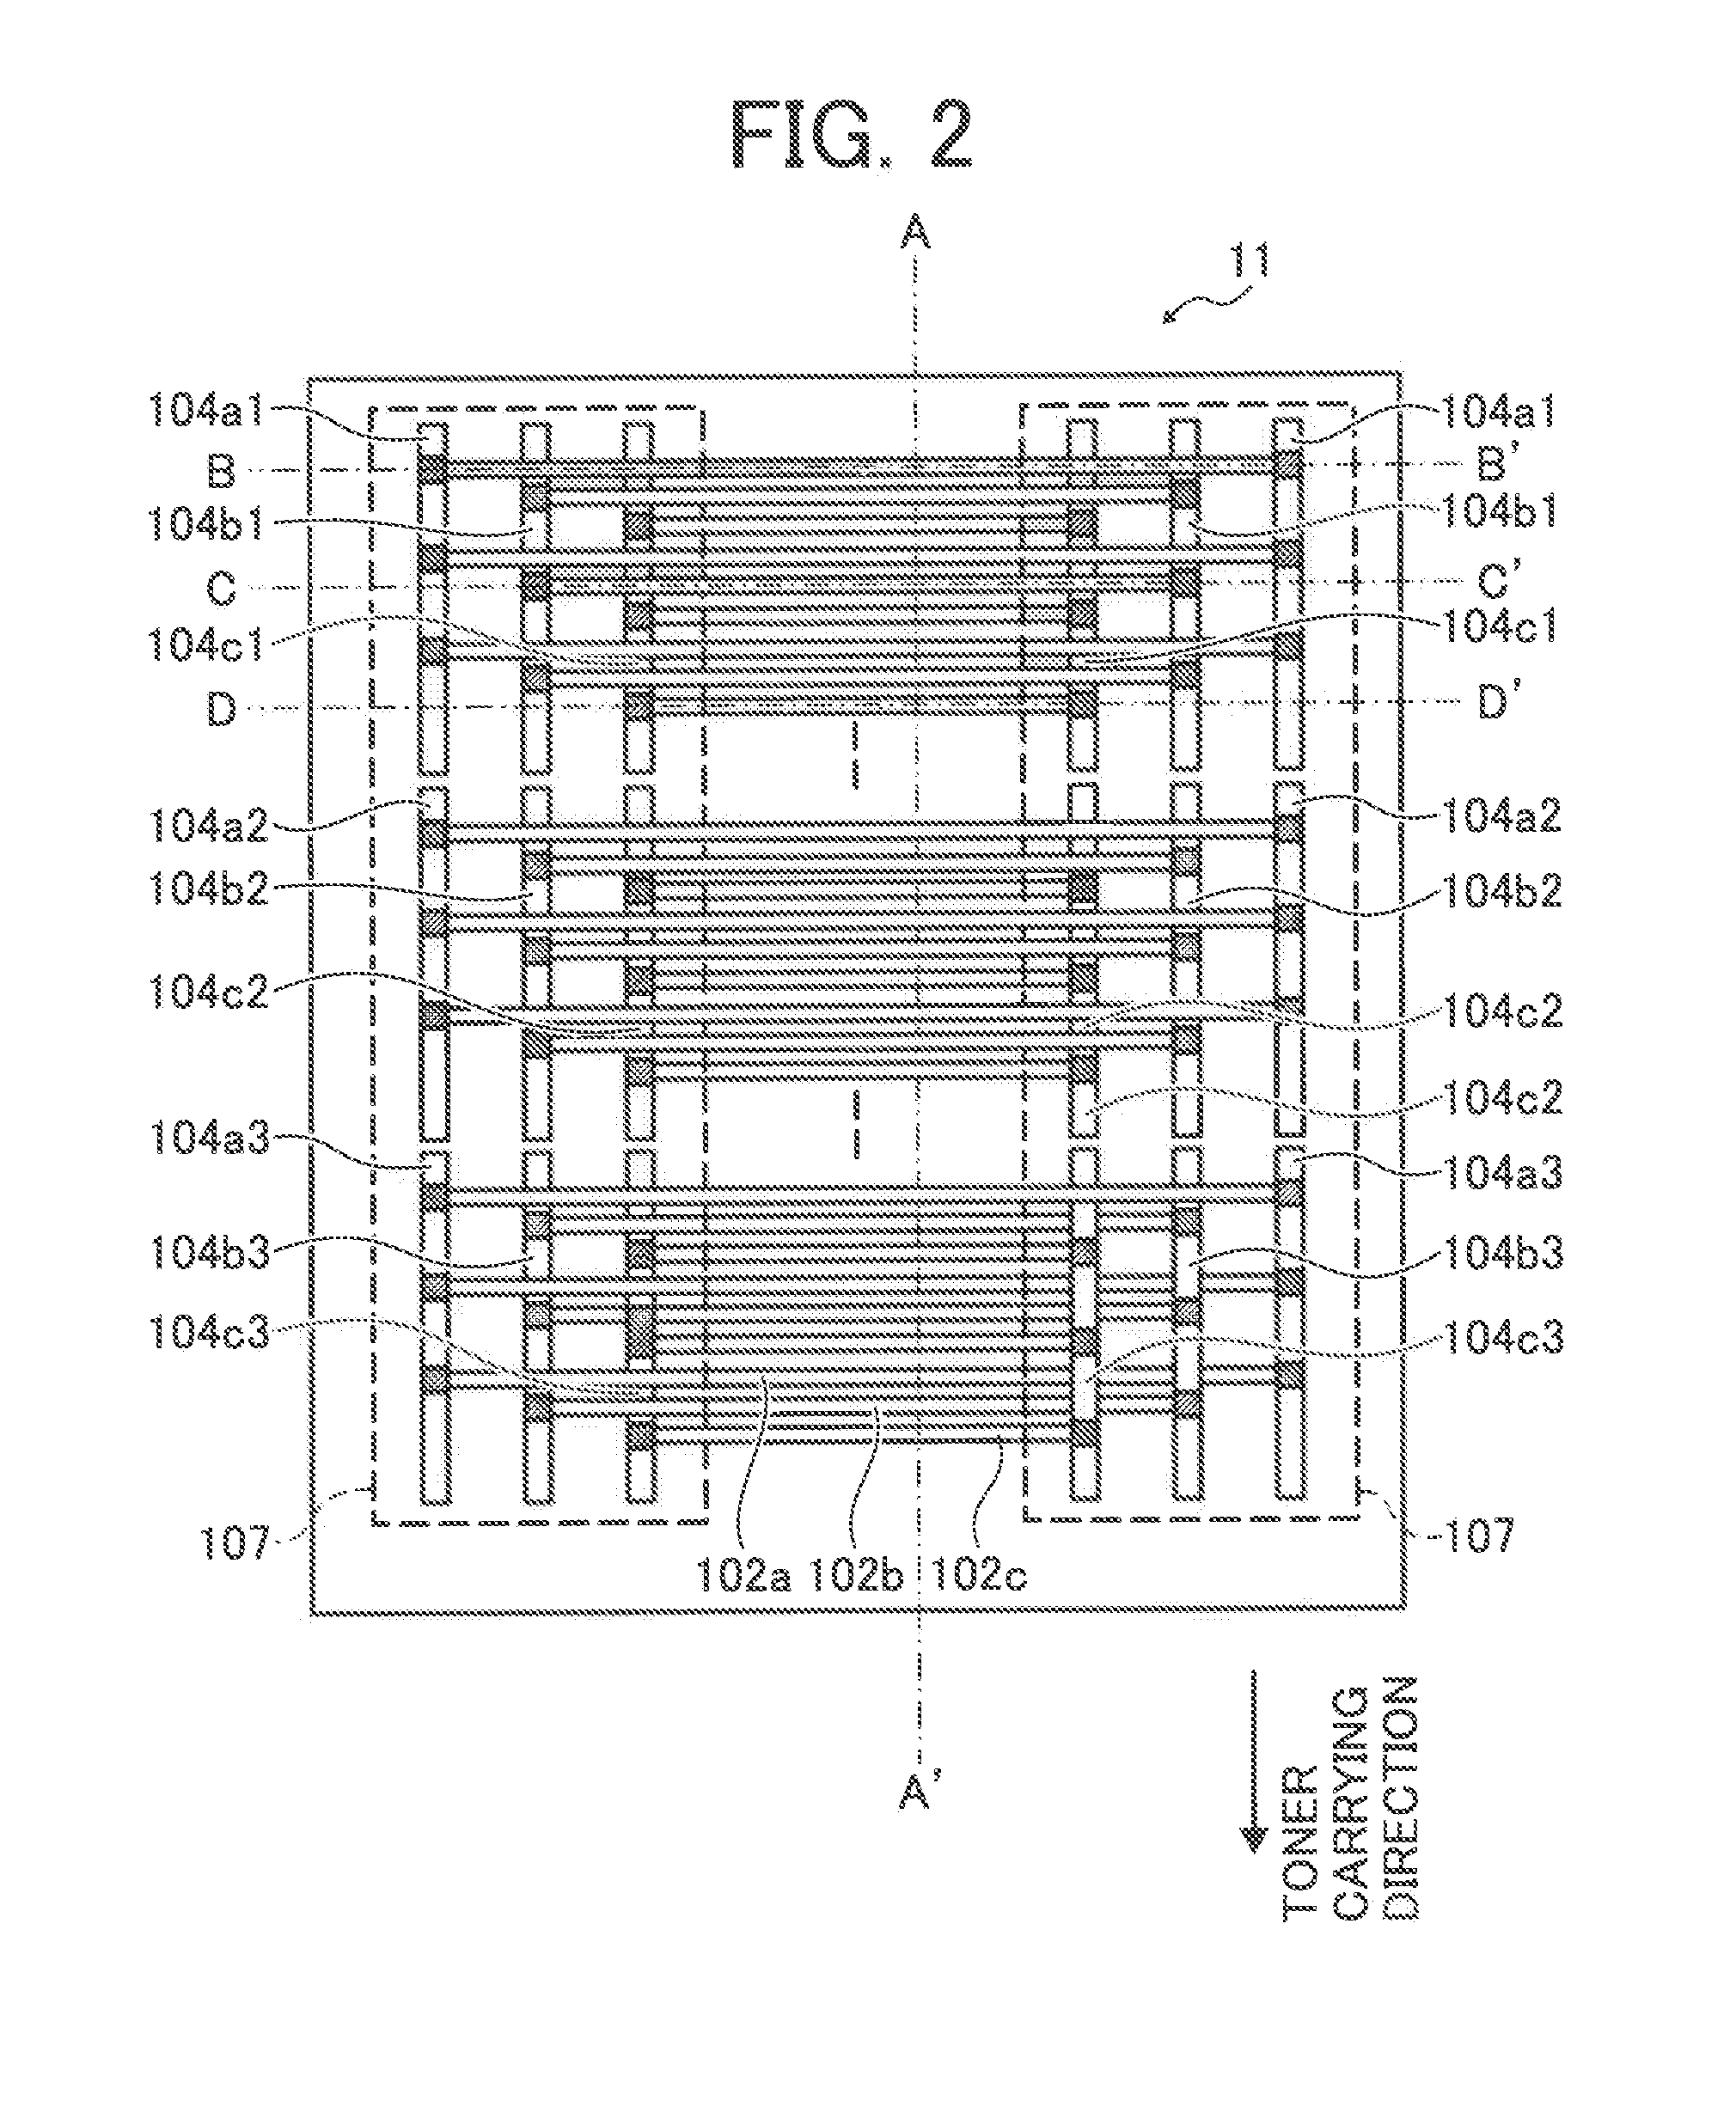 Developing device using electrostatic transport and hopping (ETH)